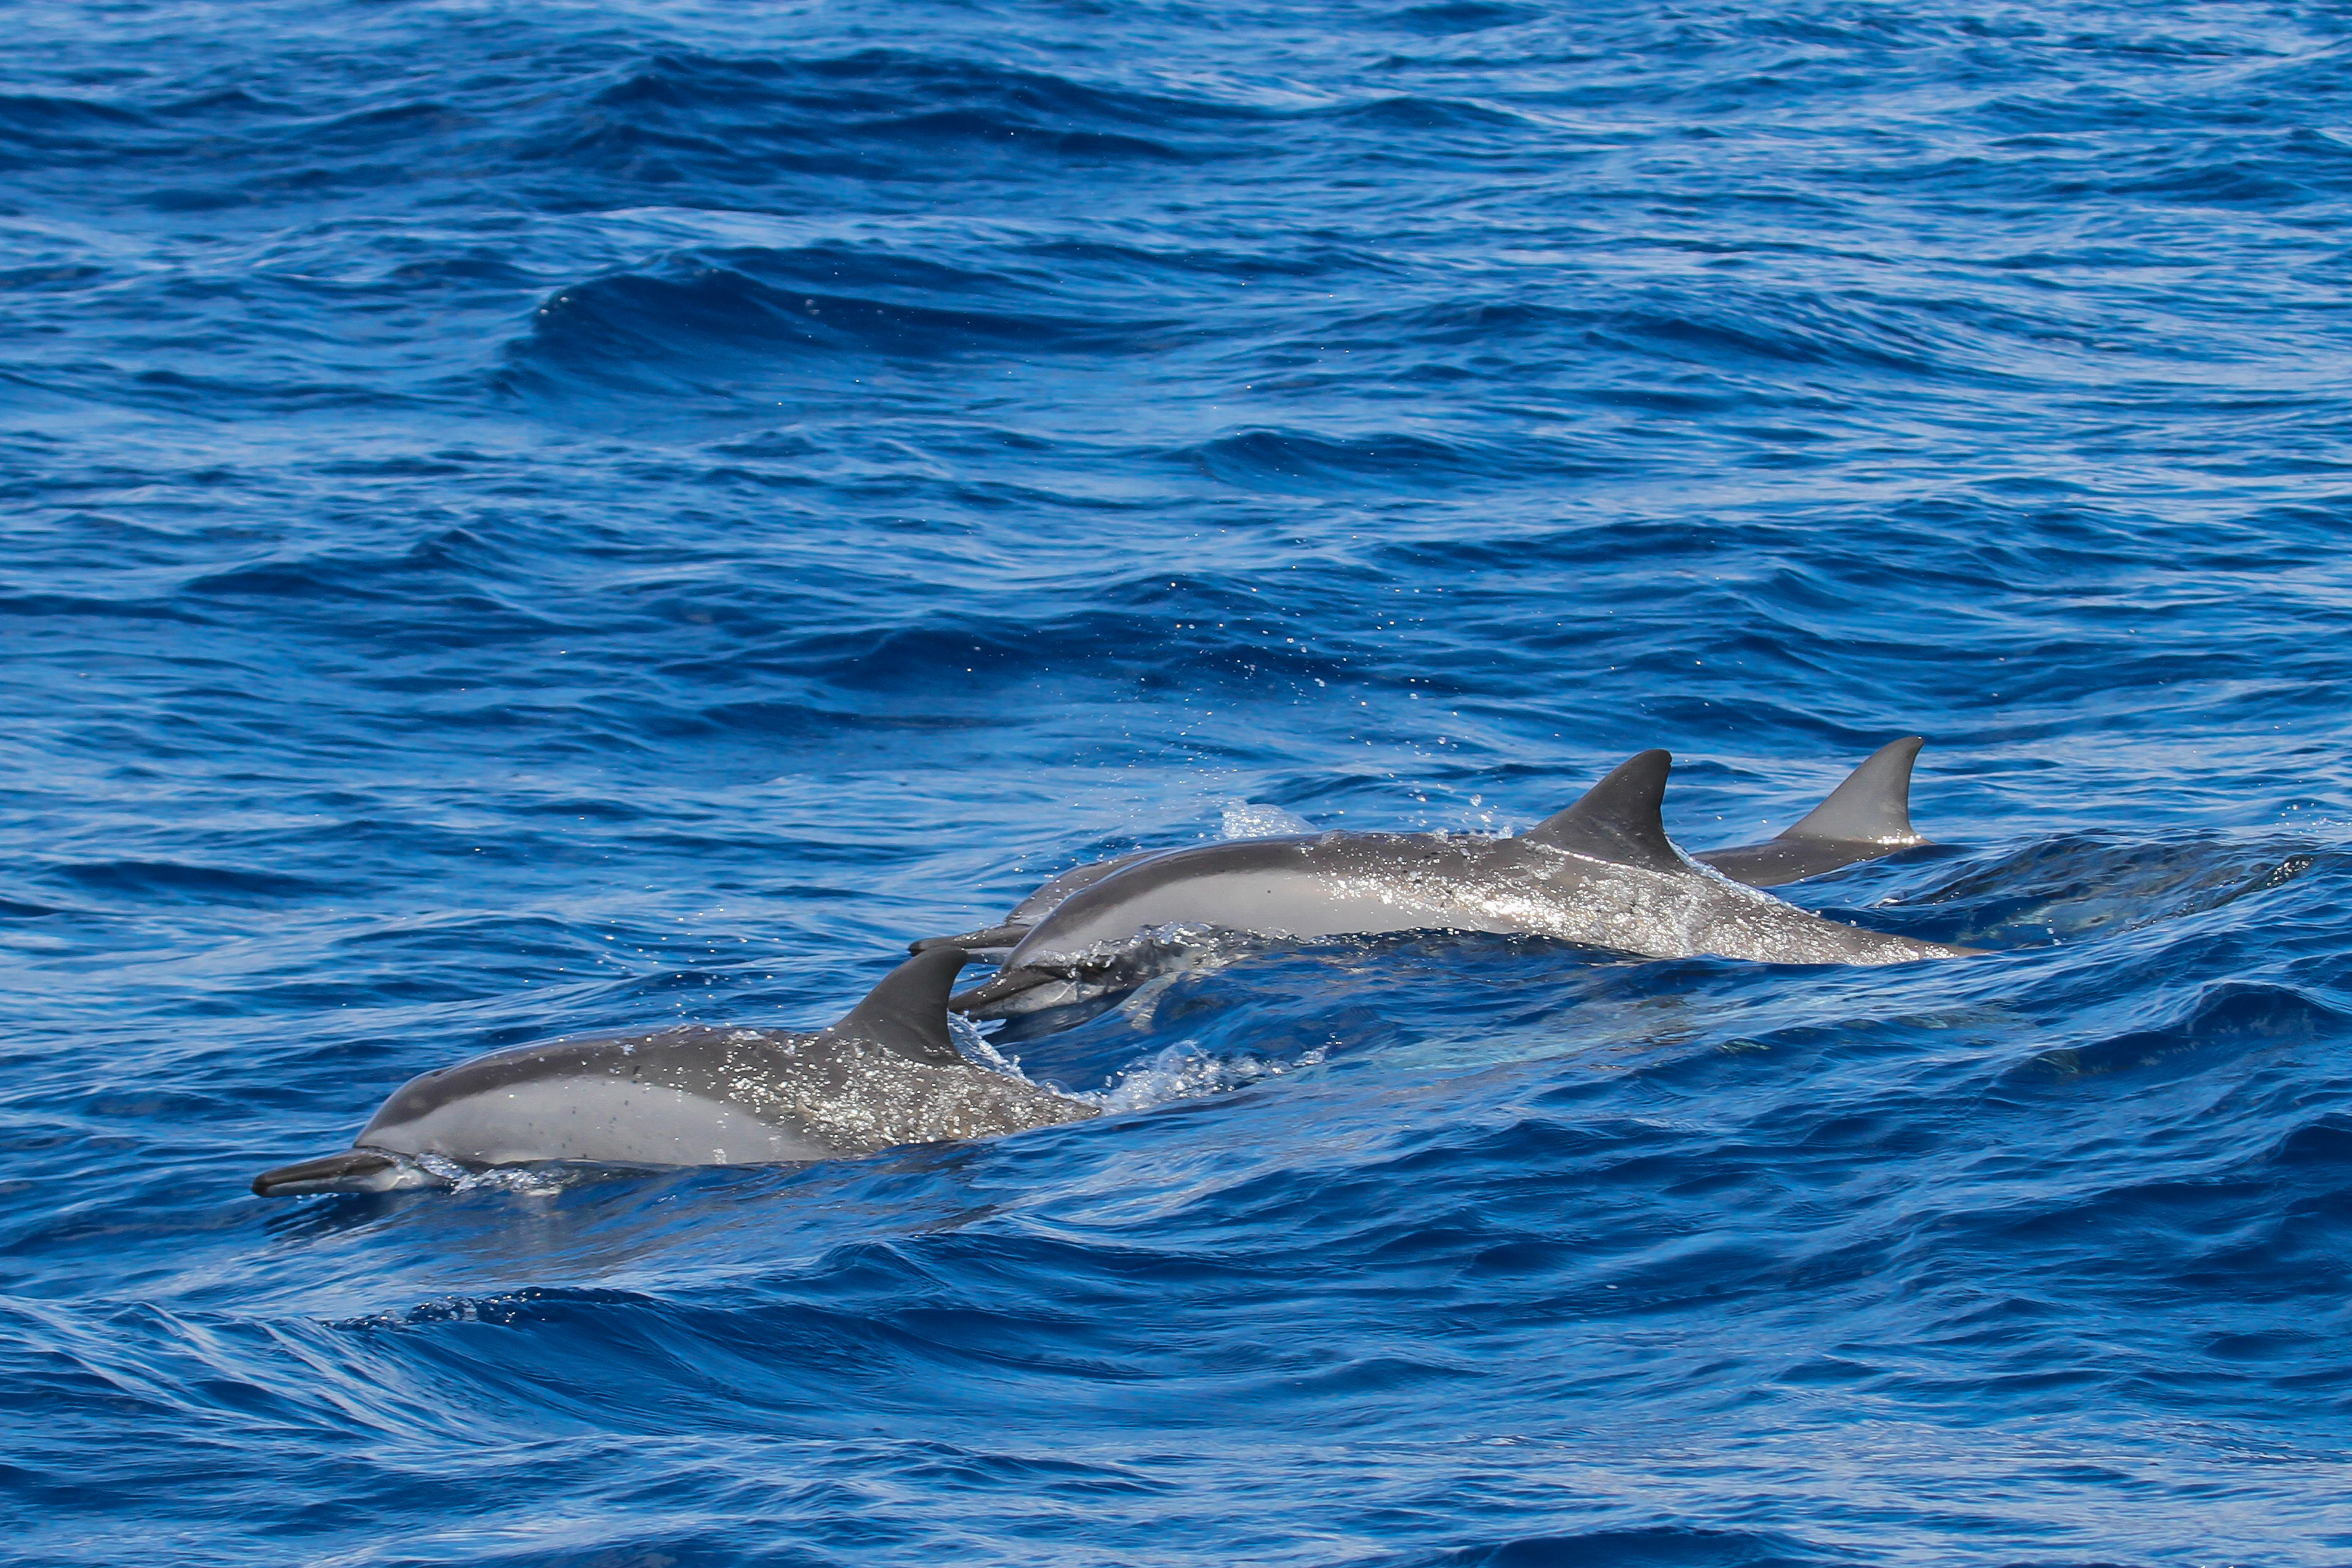 Dolphins together